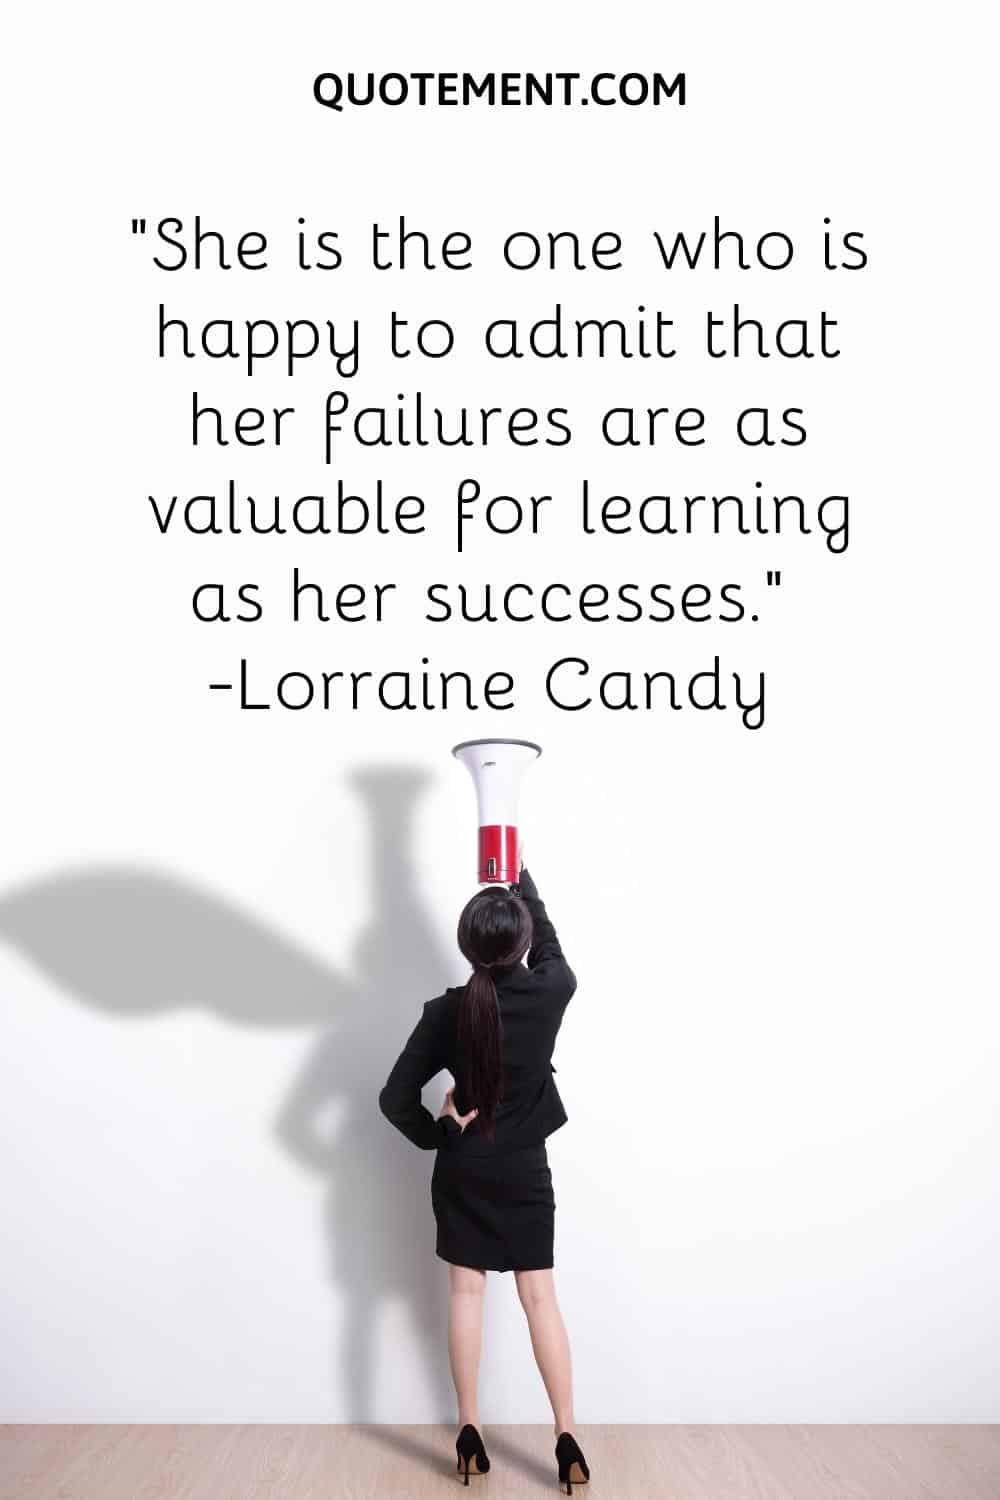 She is the one who is happy to admit that her failures are as valuable for learning as her successes